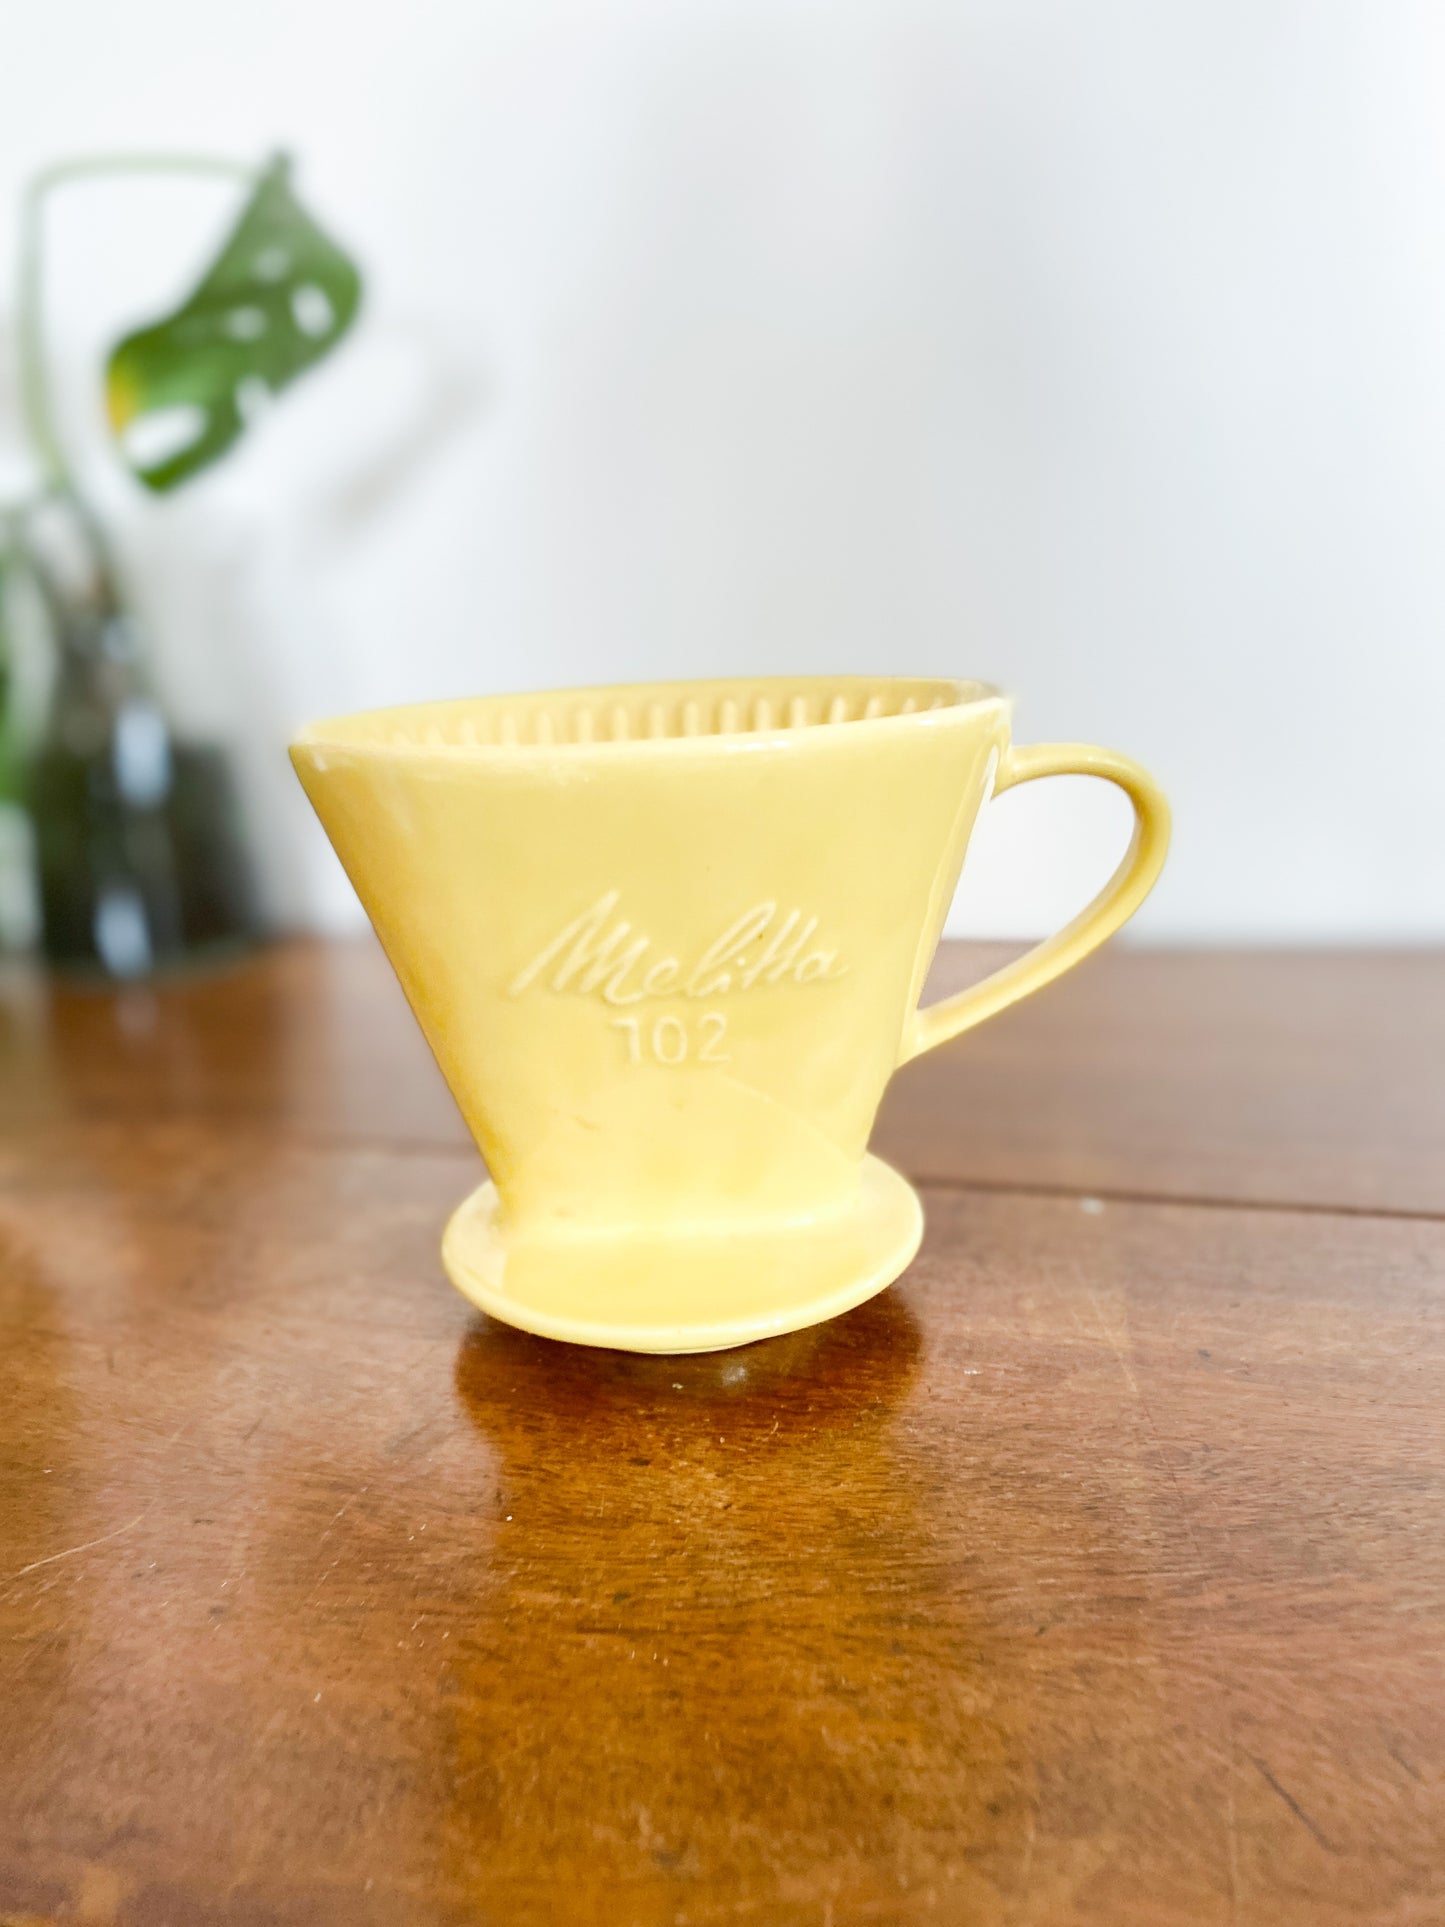 Melitta Pour Over Coffee Canister